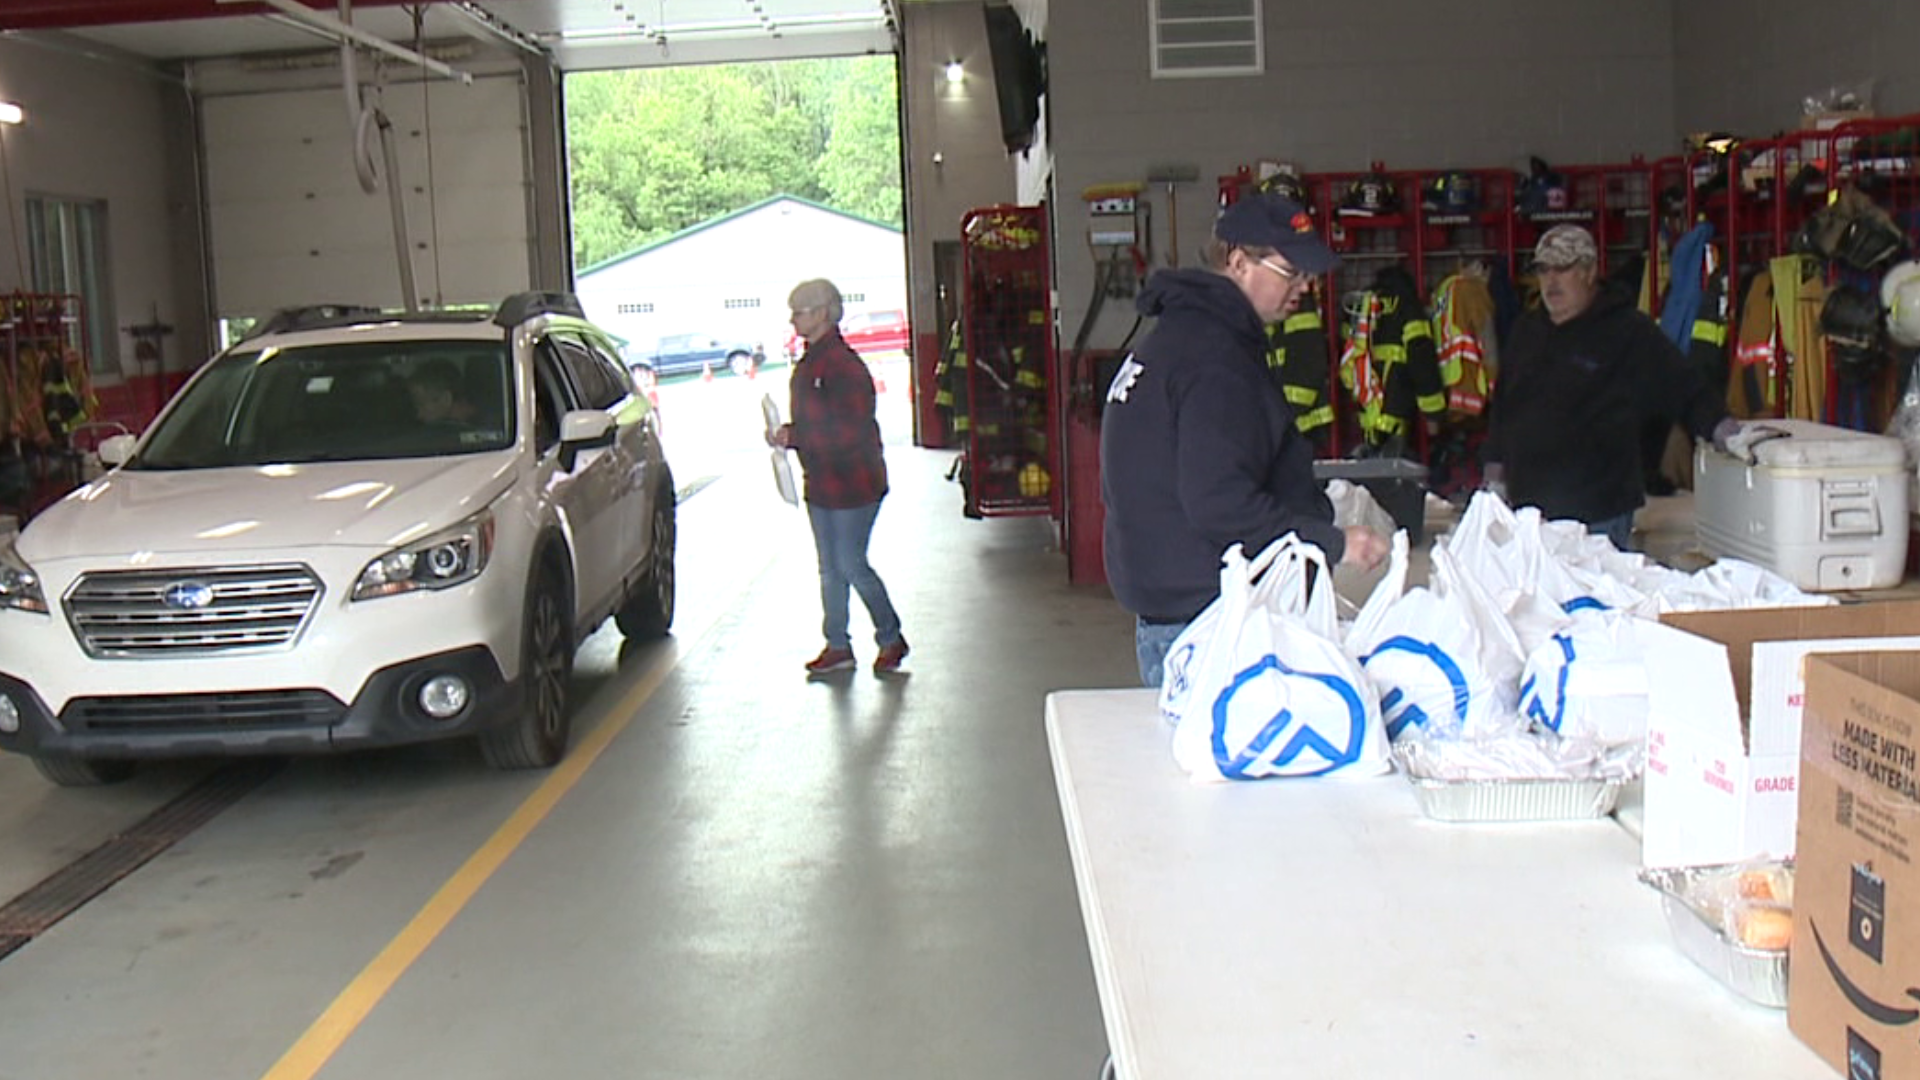 Money raised will help the hose company purchase new equipment.